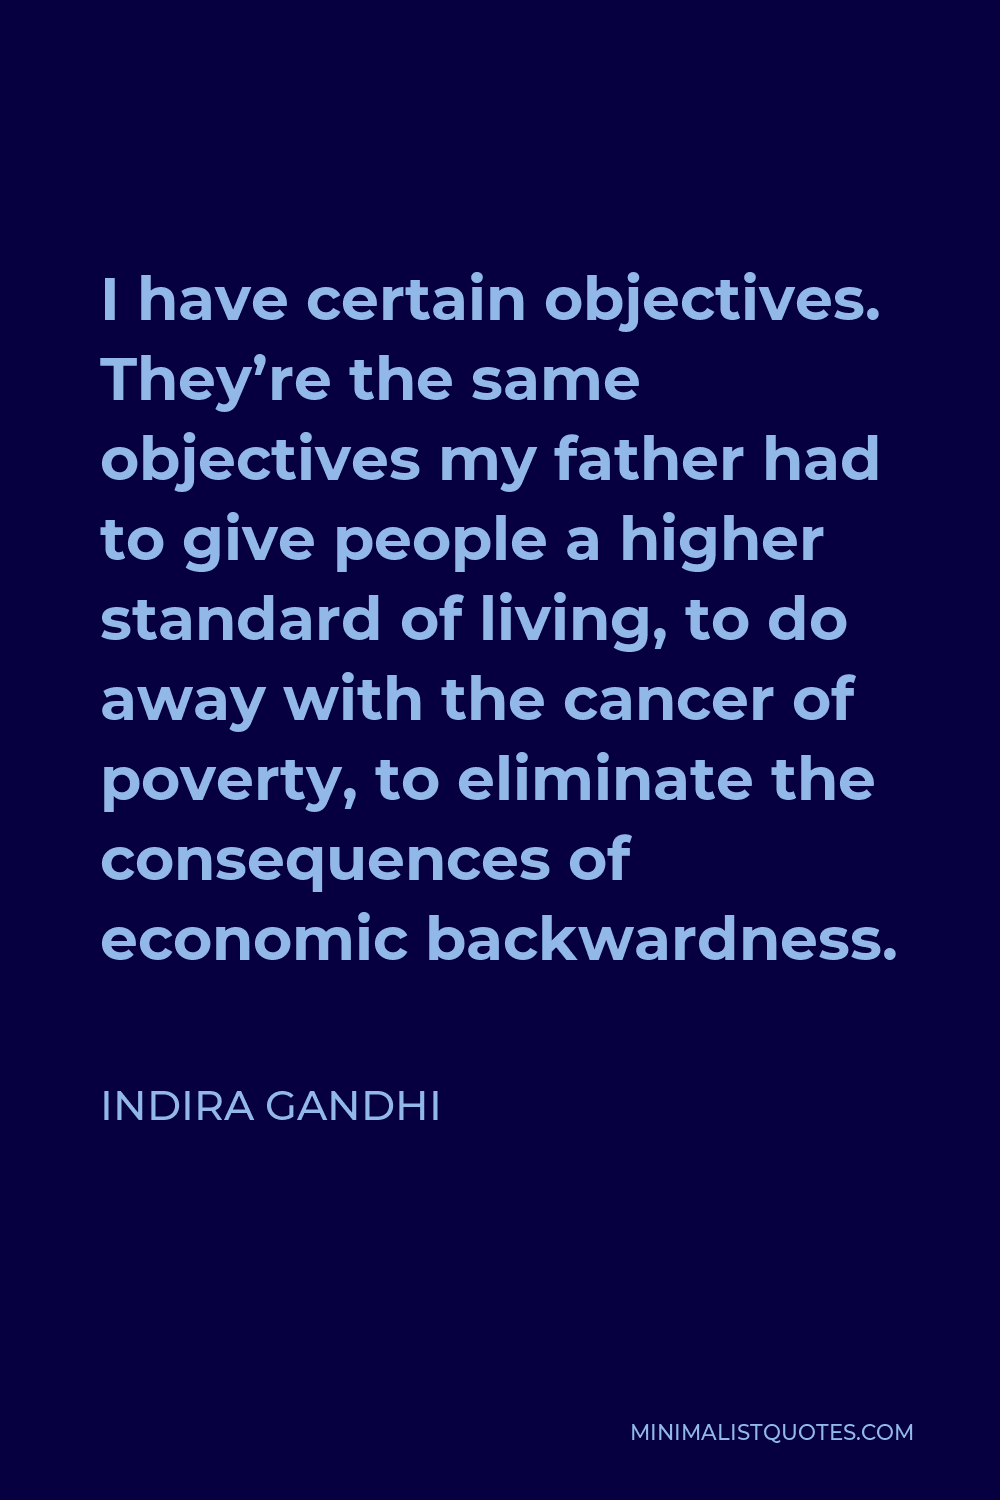 Indira Gandhi Quote - I have certain objectives. They’re the same objectives my father had to give people a higher standard of living, to do away with the cancer of poverty, to eliminate the consequences of economic backwardness.